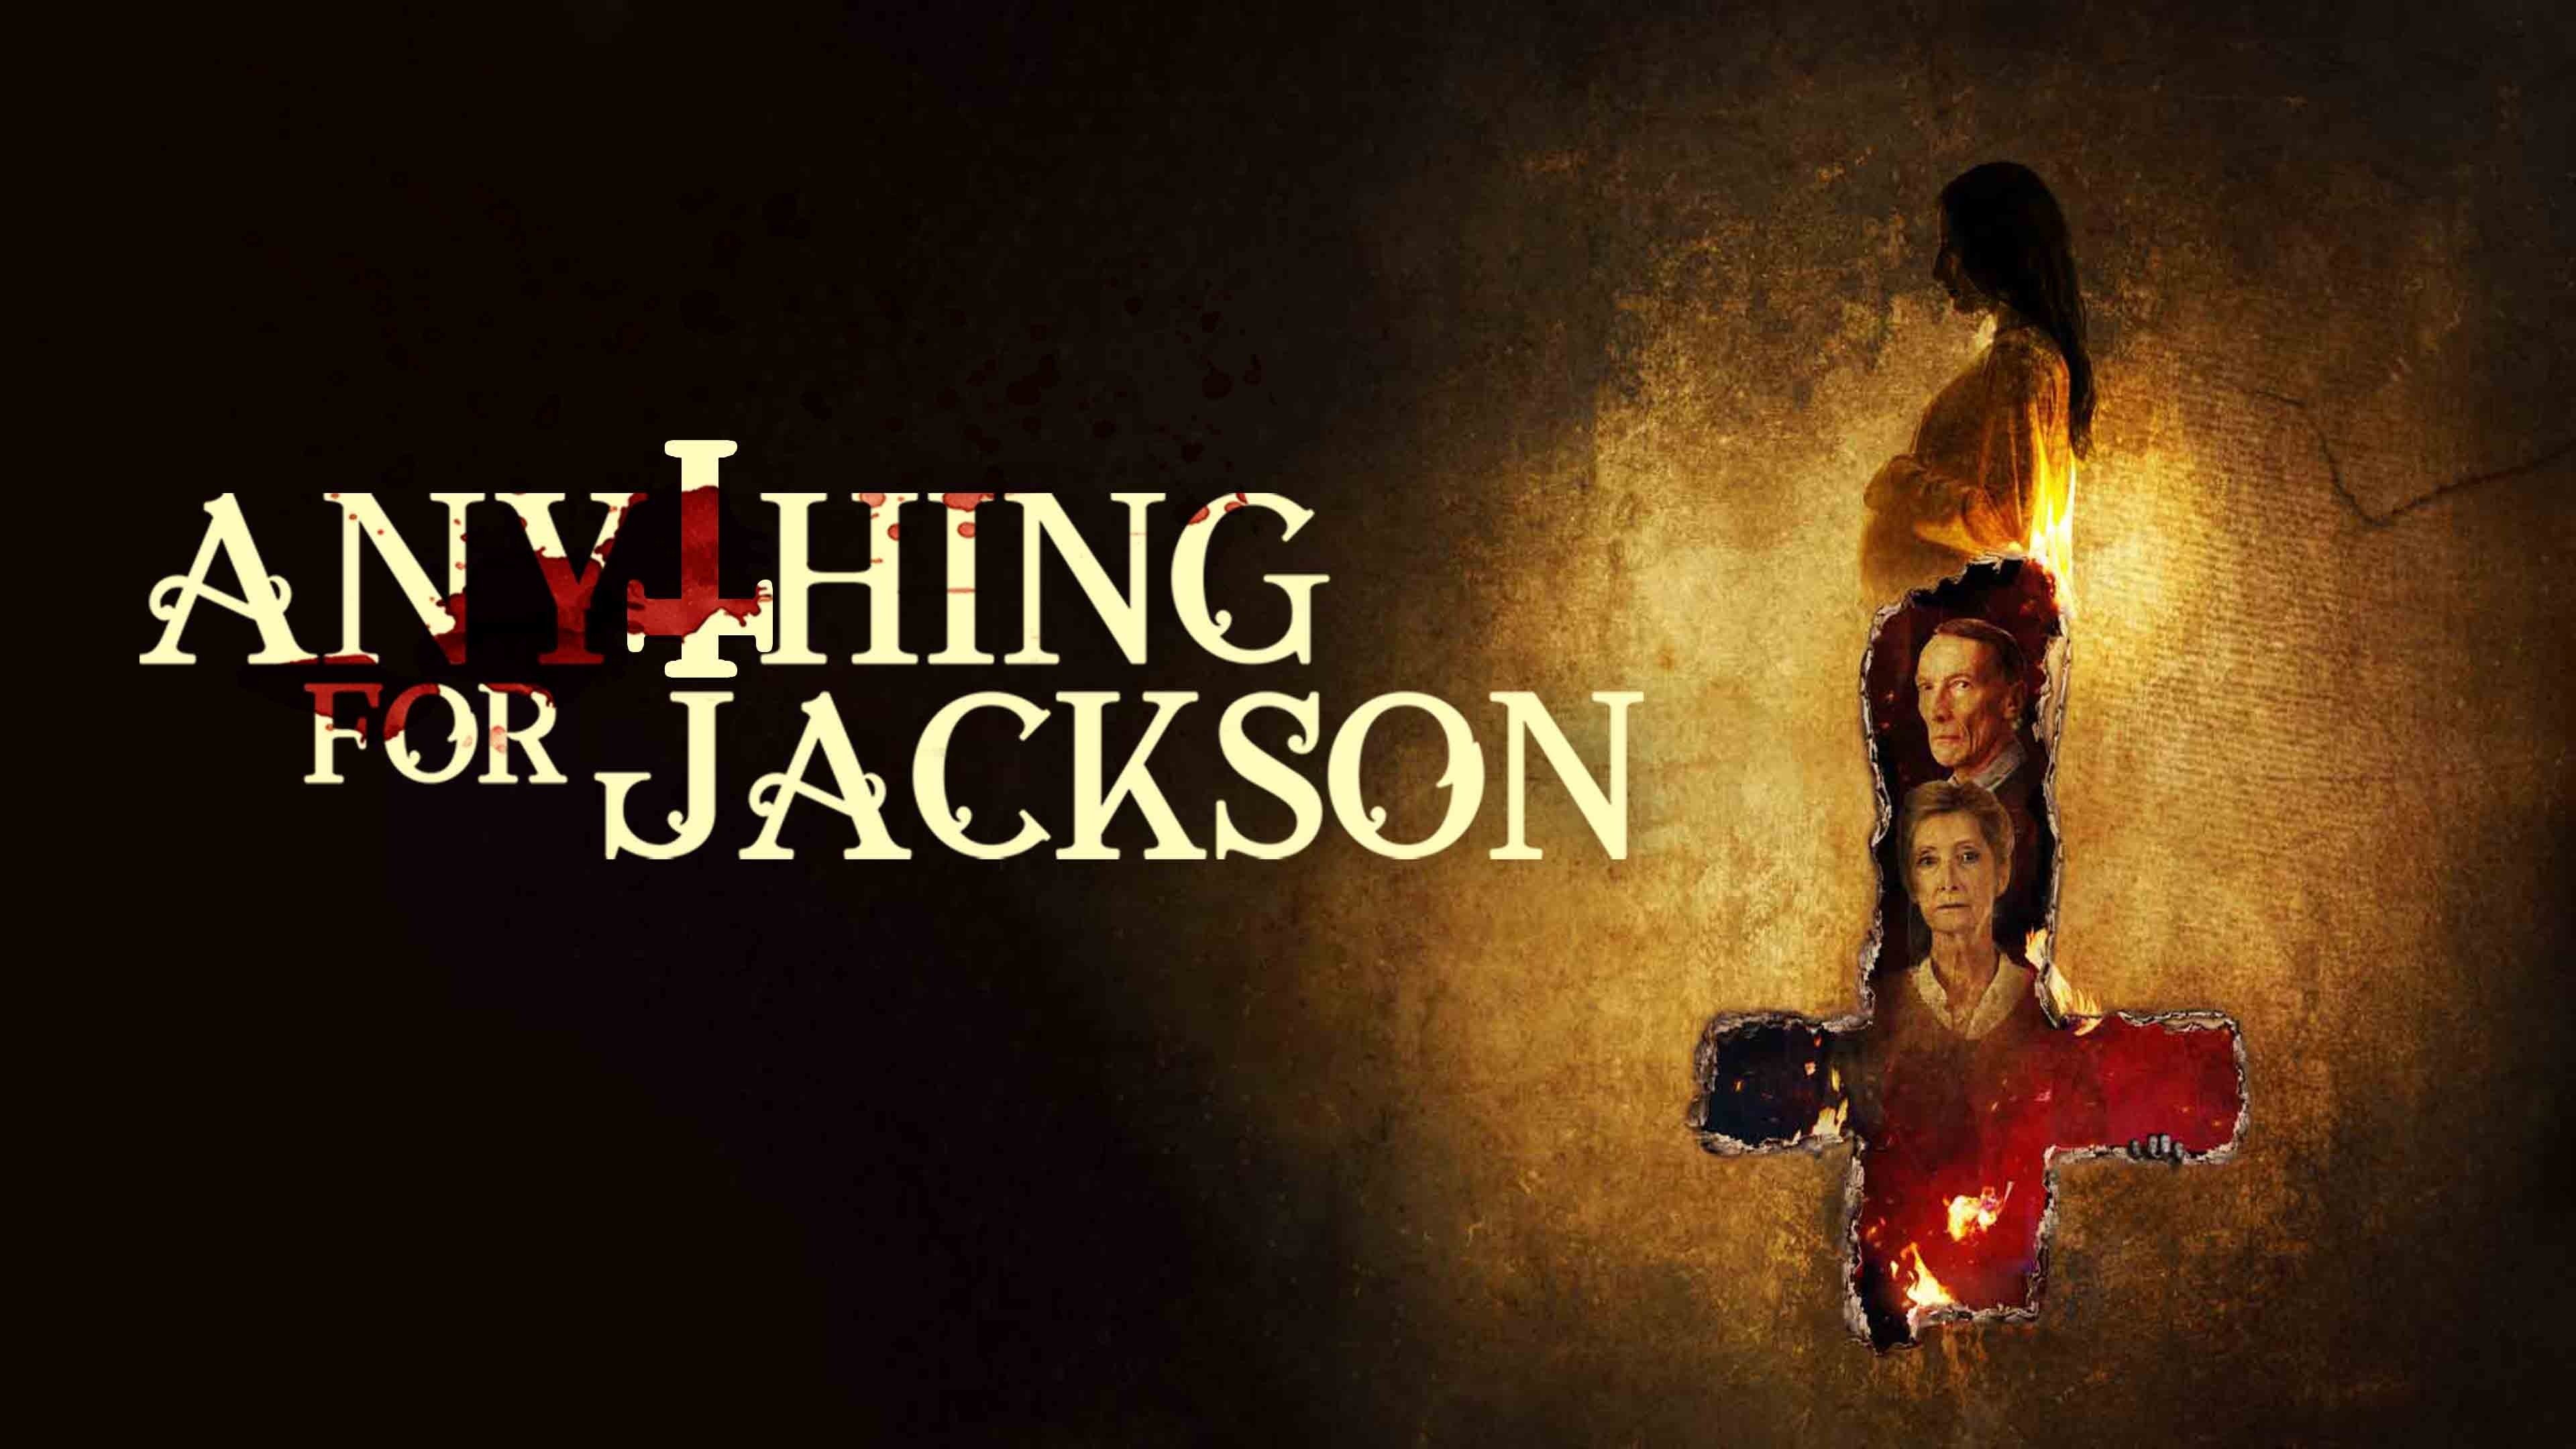 ANYTHING FOR JACKSON CAST INTERVIEWS - THE HORROR ENTERTAINMENT MAGAZINE